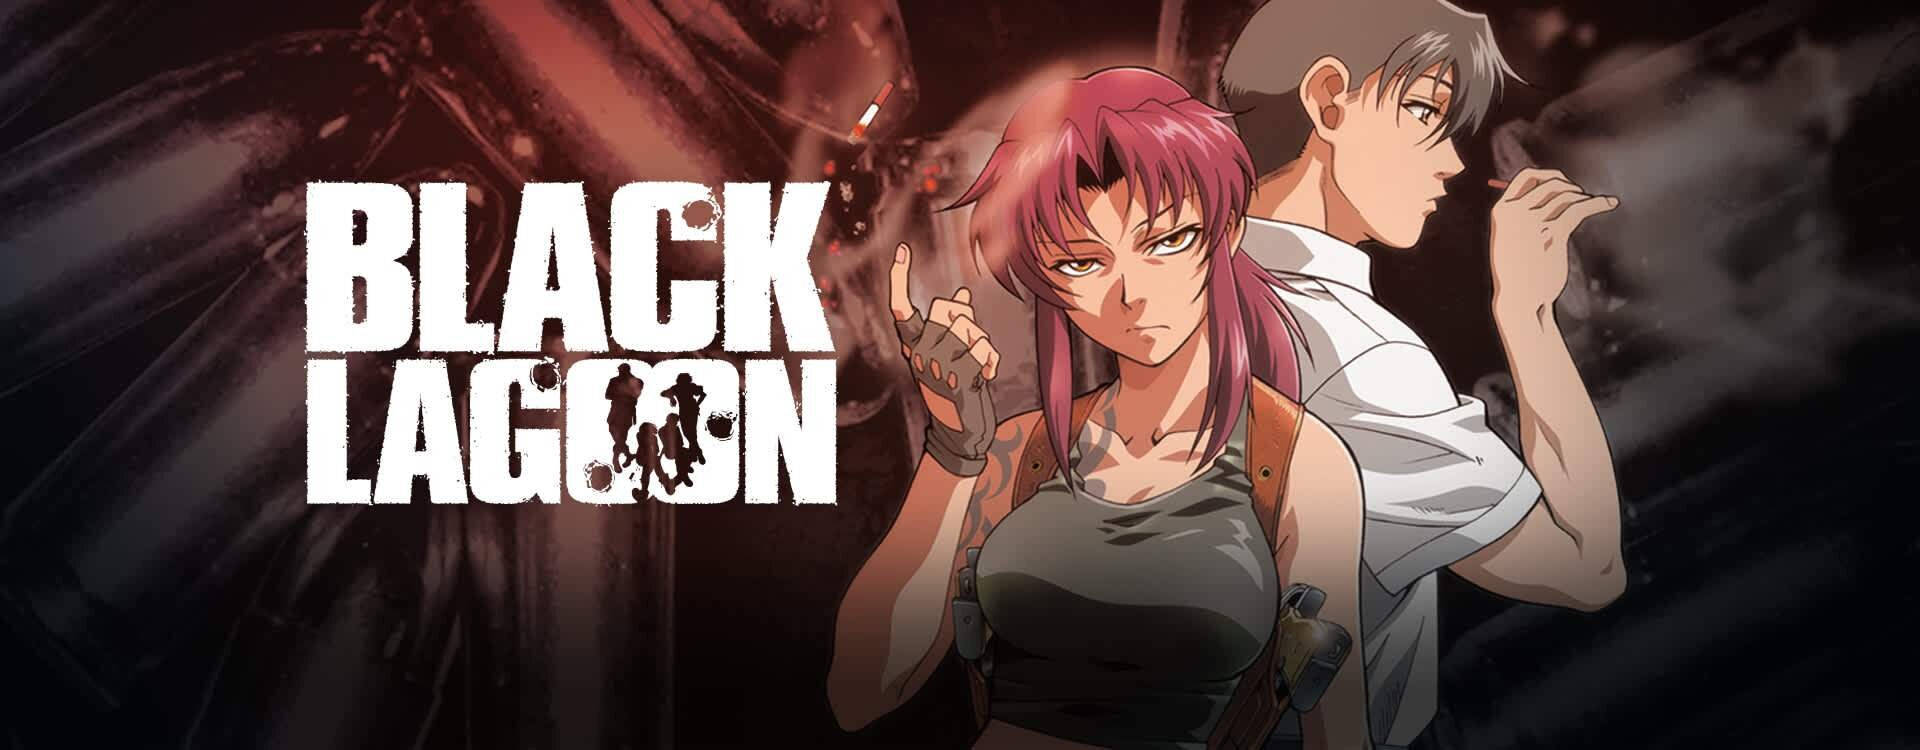 Black Lagoon Compelling Poster Background